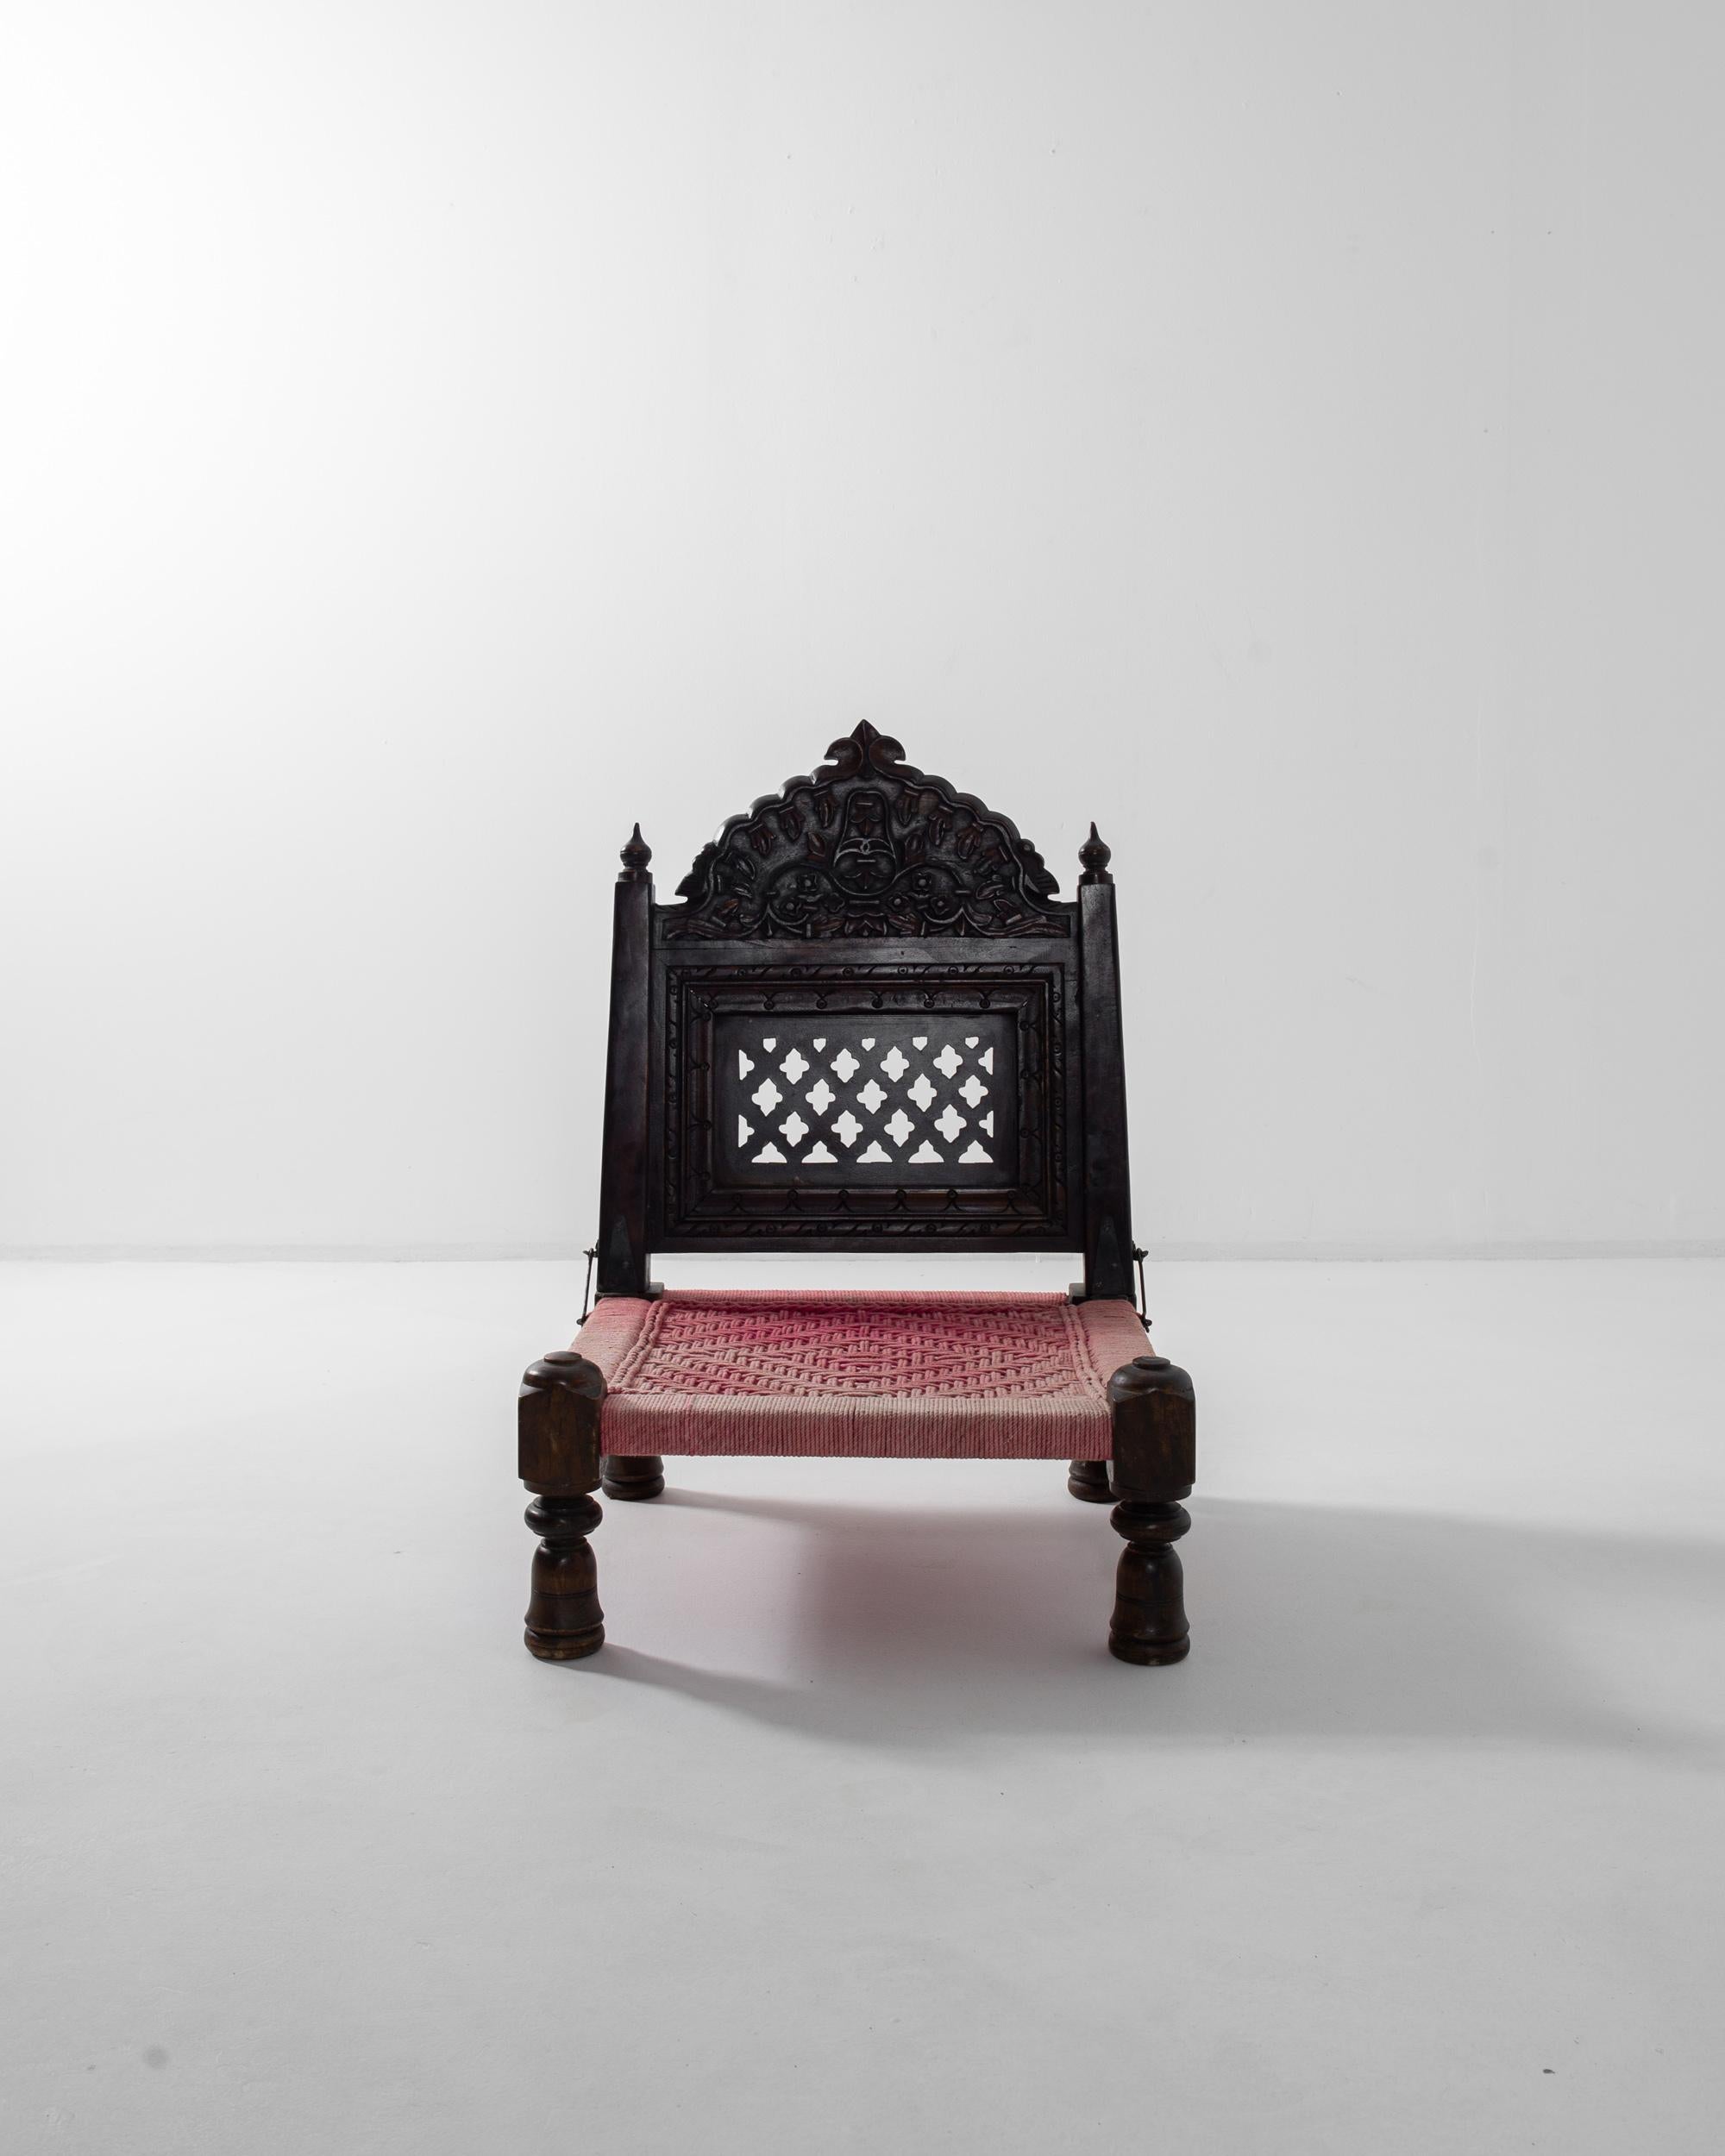 A beautifully ornate piece with a distinctive function, this vintage wooden berber’s chair is a truly unique find. Made in North Africa in the 20th century, the chair would have originally been used by ambulant berber people whose transient